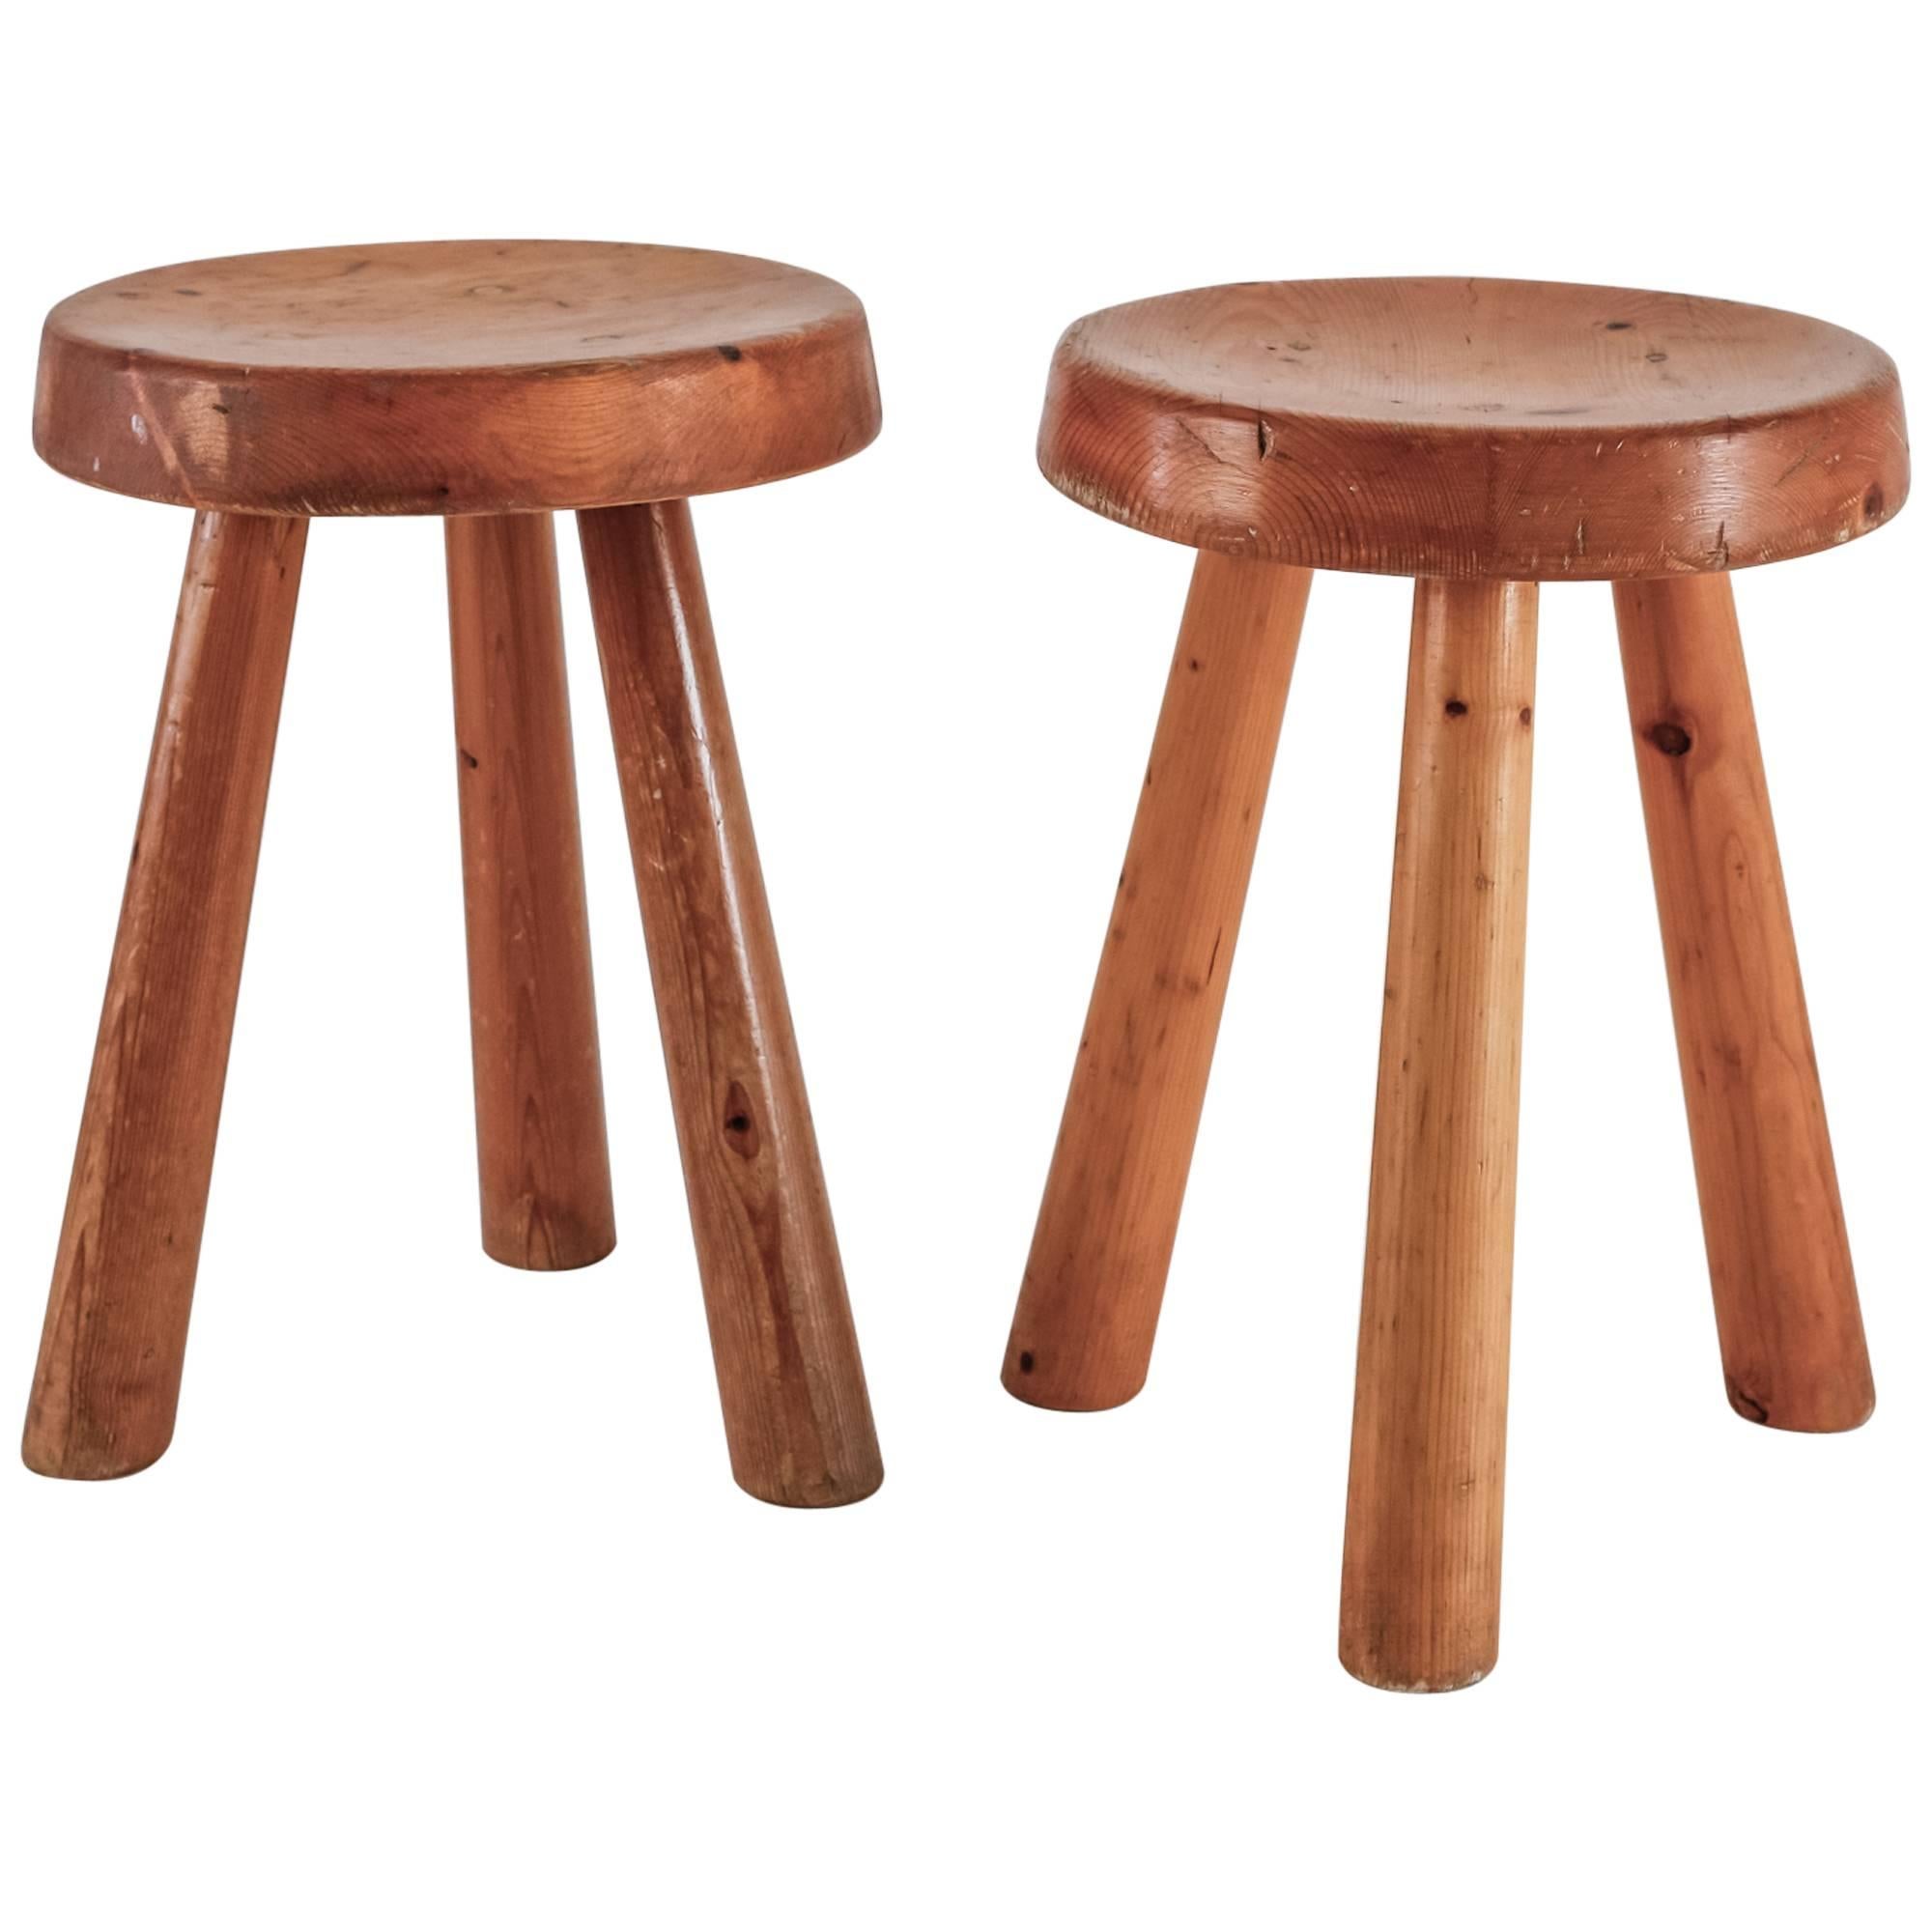 Charlotte Perriand Pair of Tripod Pine Stool from Les Arcs, France, 1960s For Sale